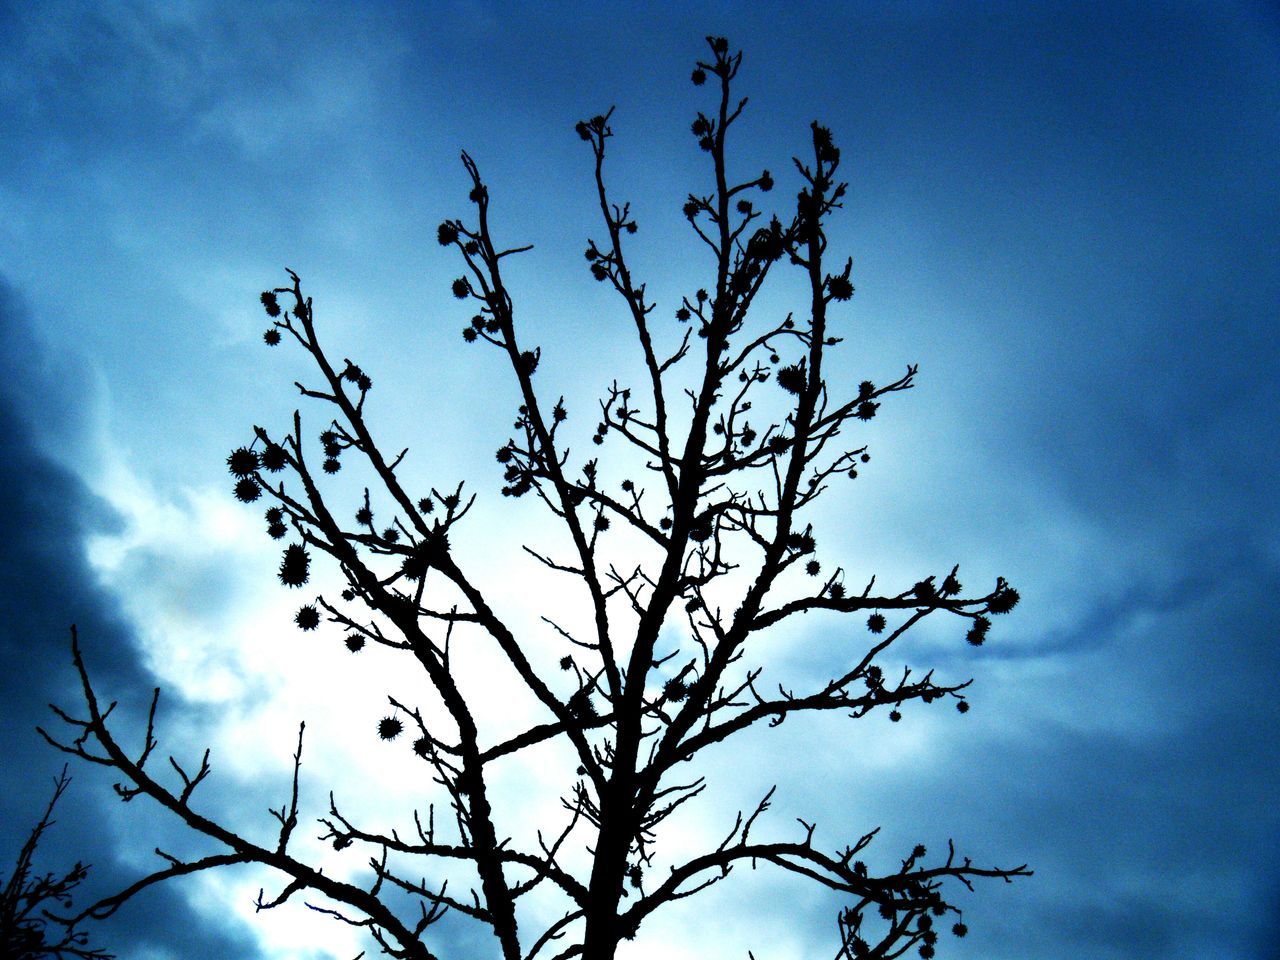 SILHOUETTE OF BARE TREE AGAINST SKY